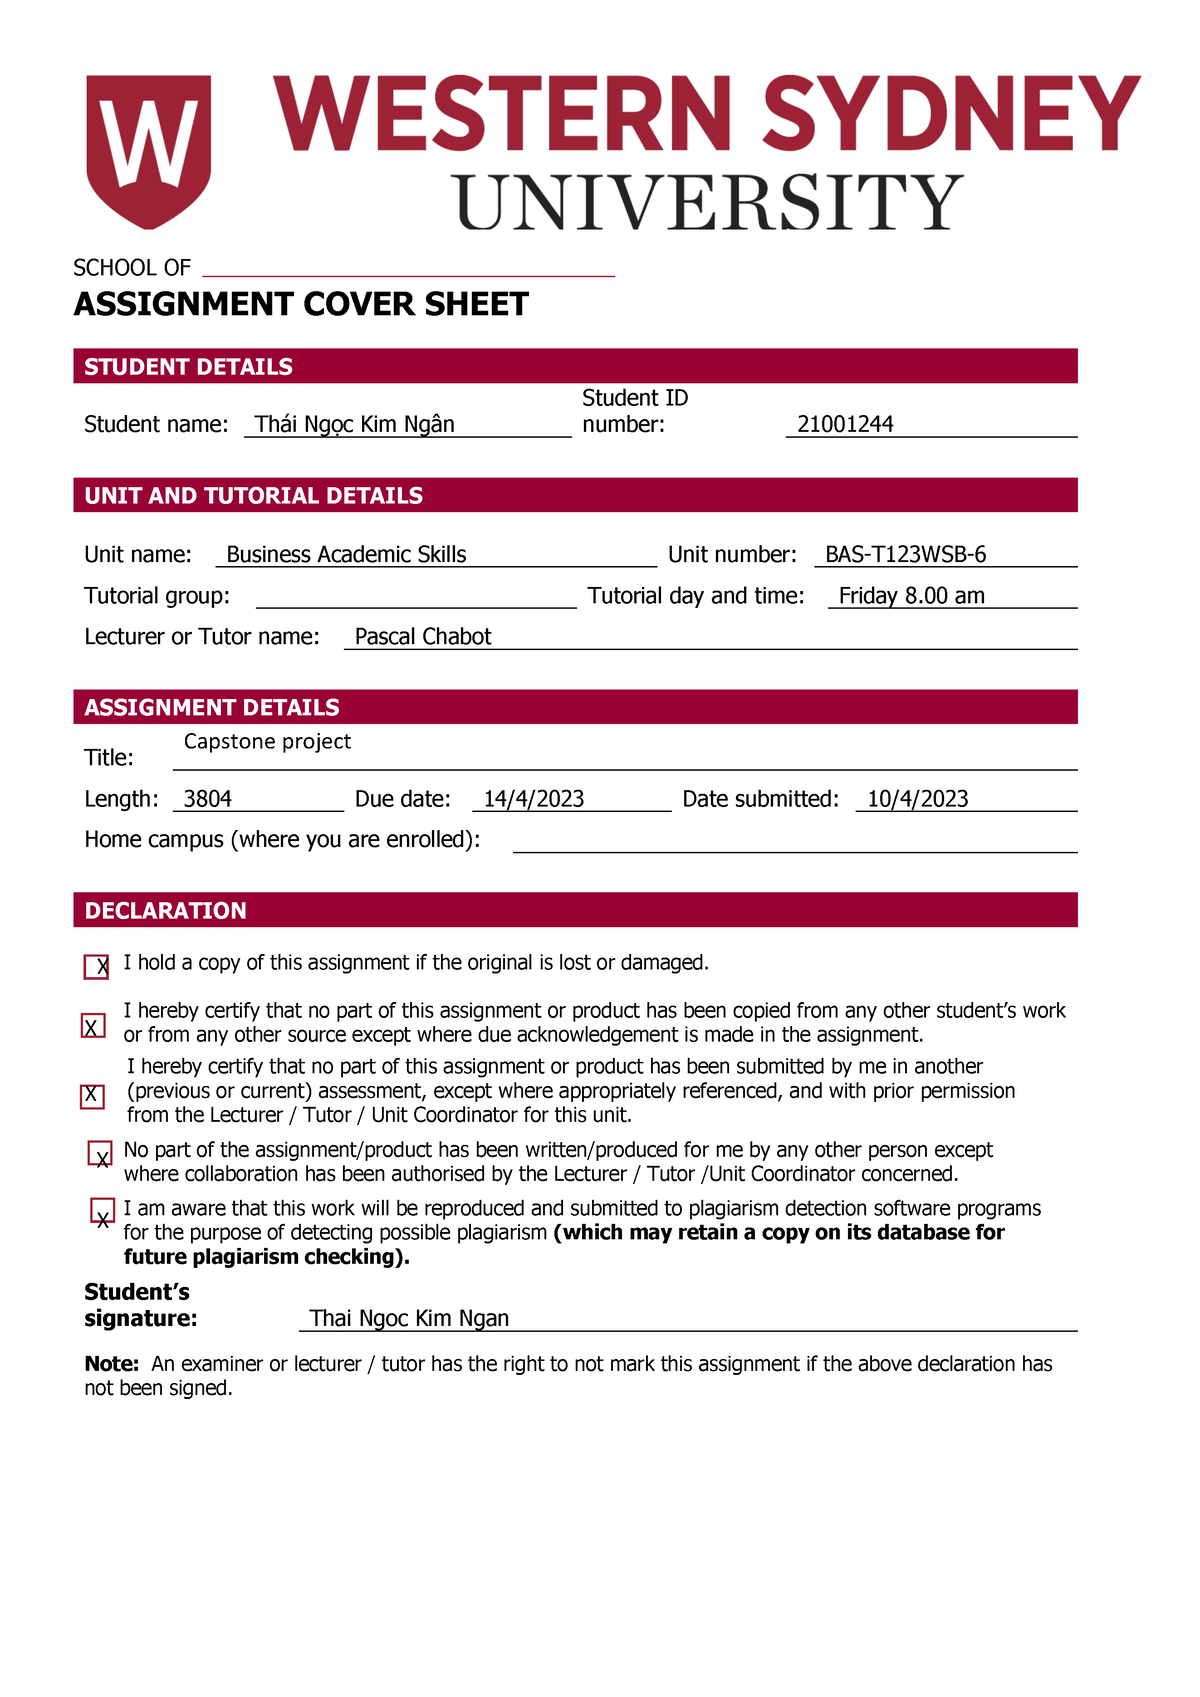 Capstone Project-pdf - ..s..s - SCHOOL OF ASSIGNMENT COVER SHEET ...